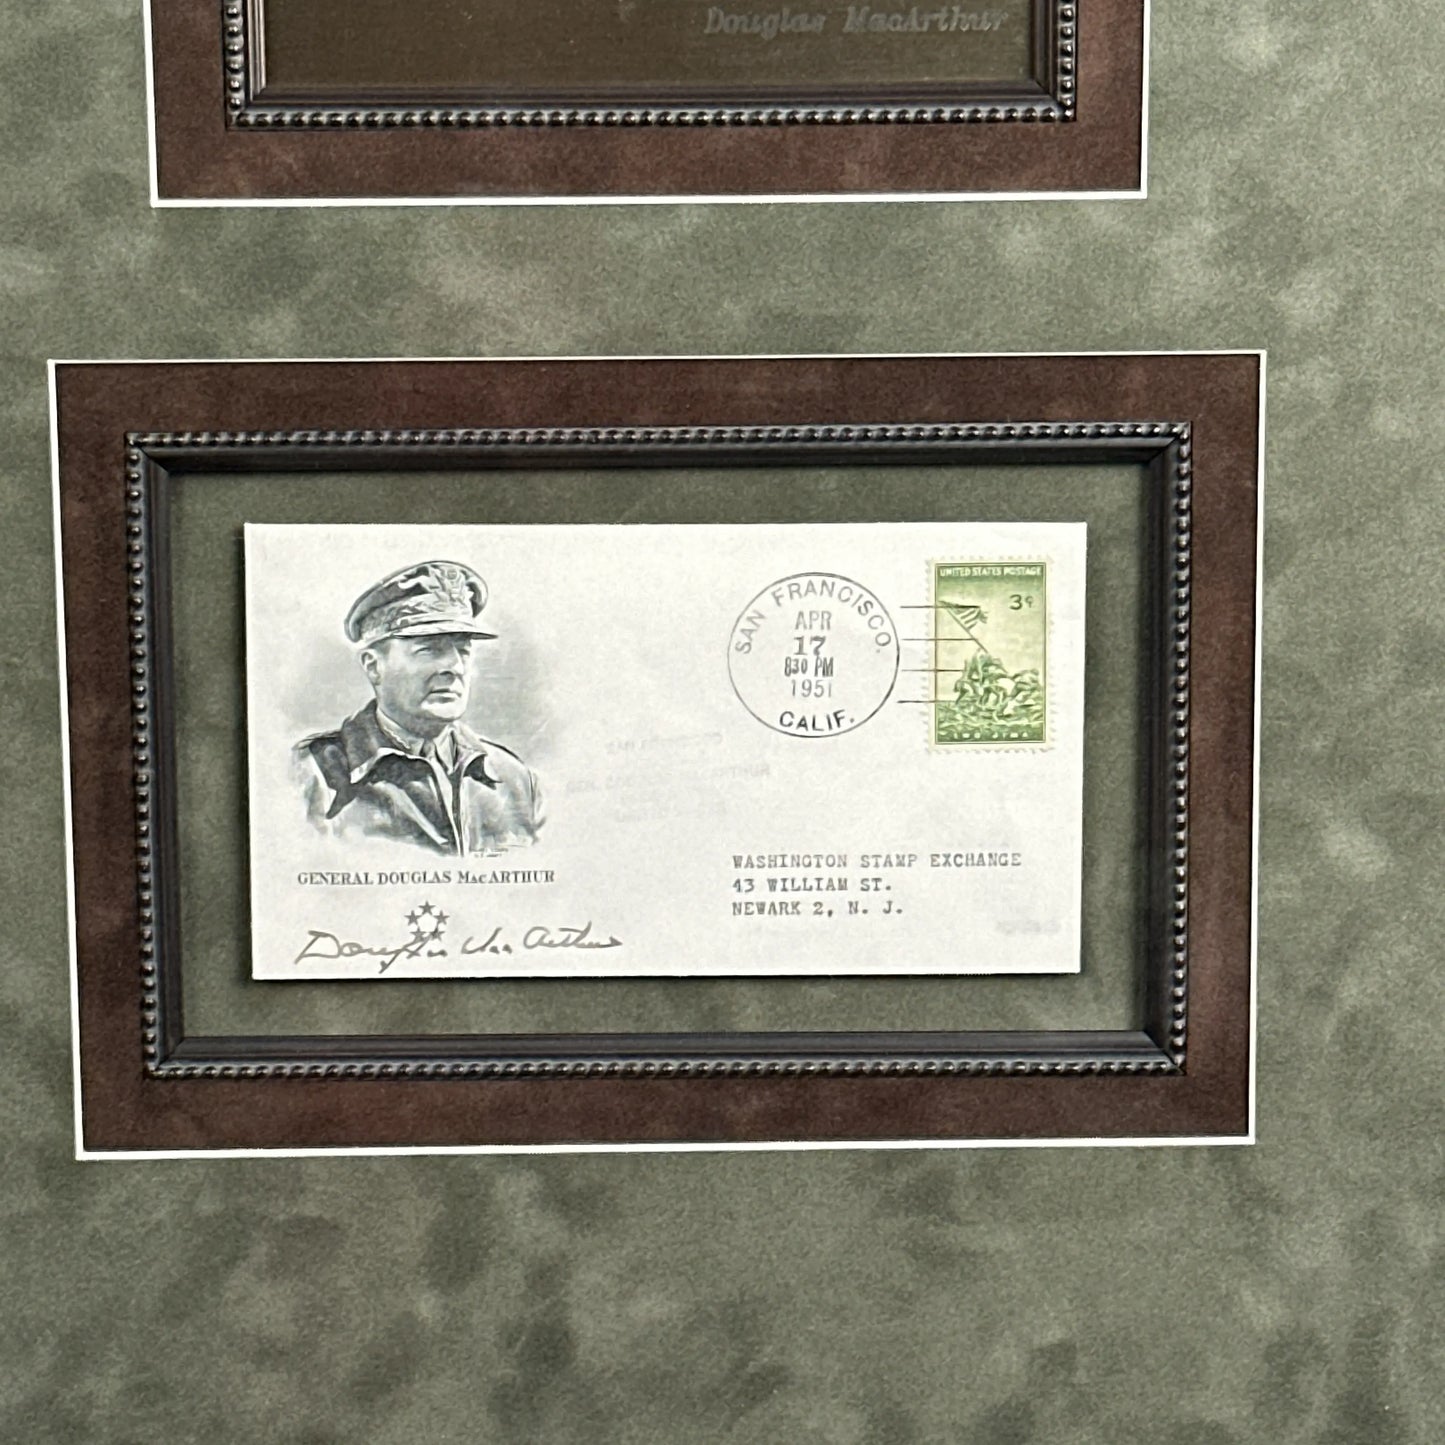 General Douglas MacArthur - Framed with signature - "Duty, honor, country . . ."